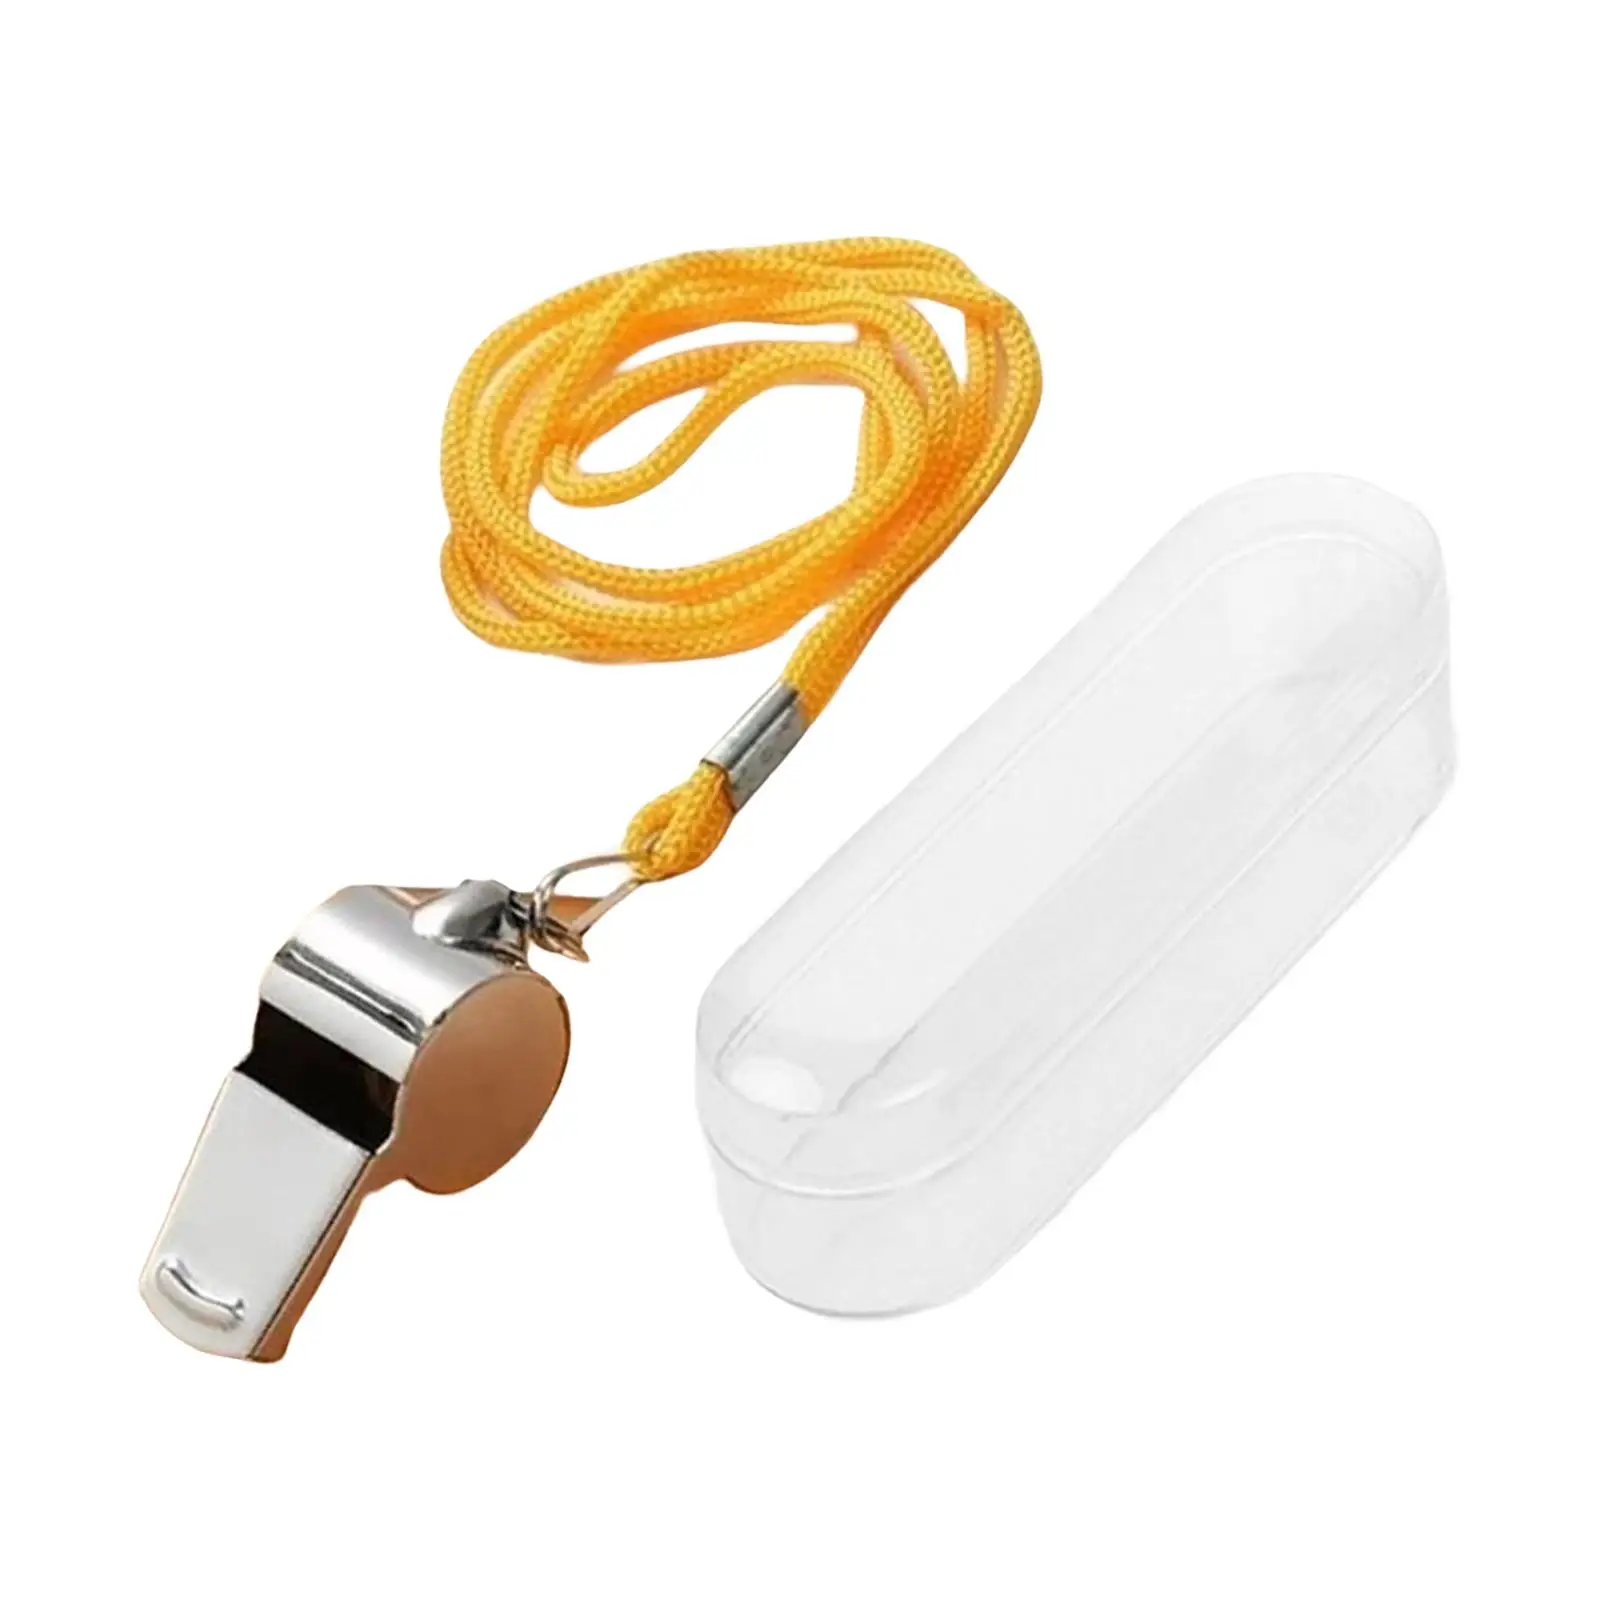 Stainless Steel Sports Whistles Super Loud for Football Training